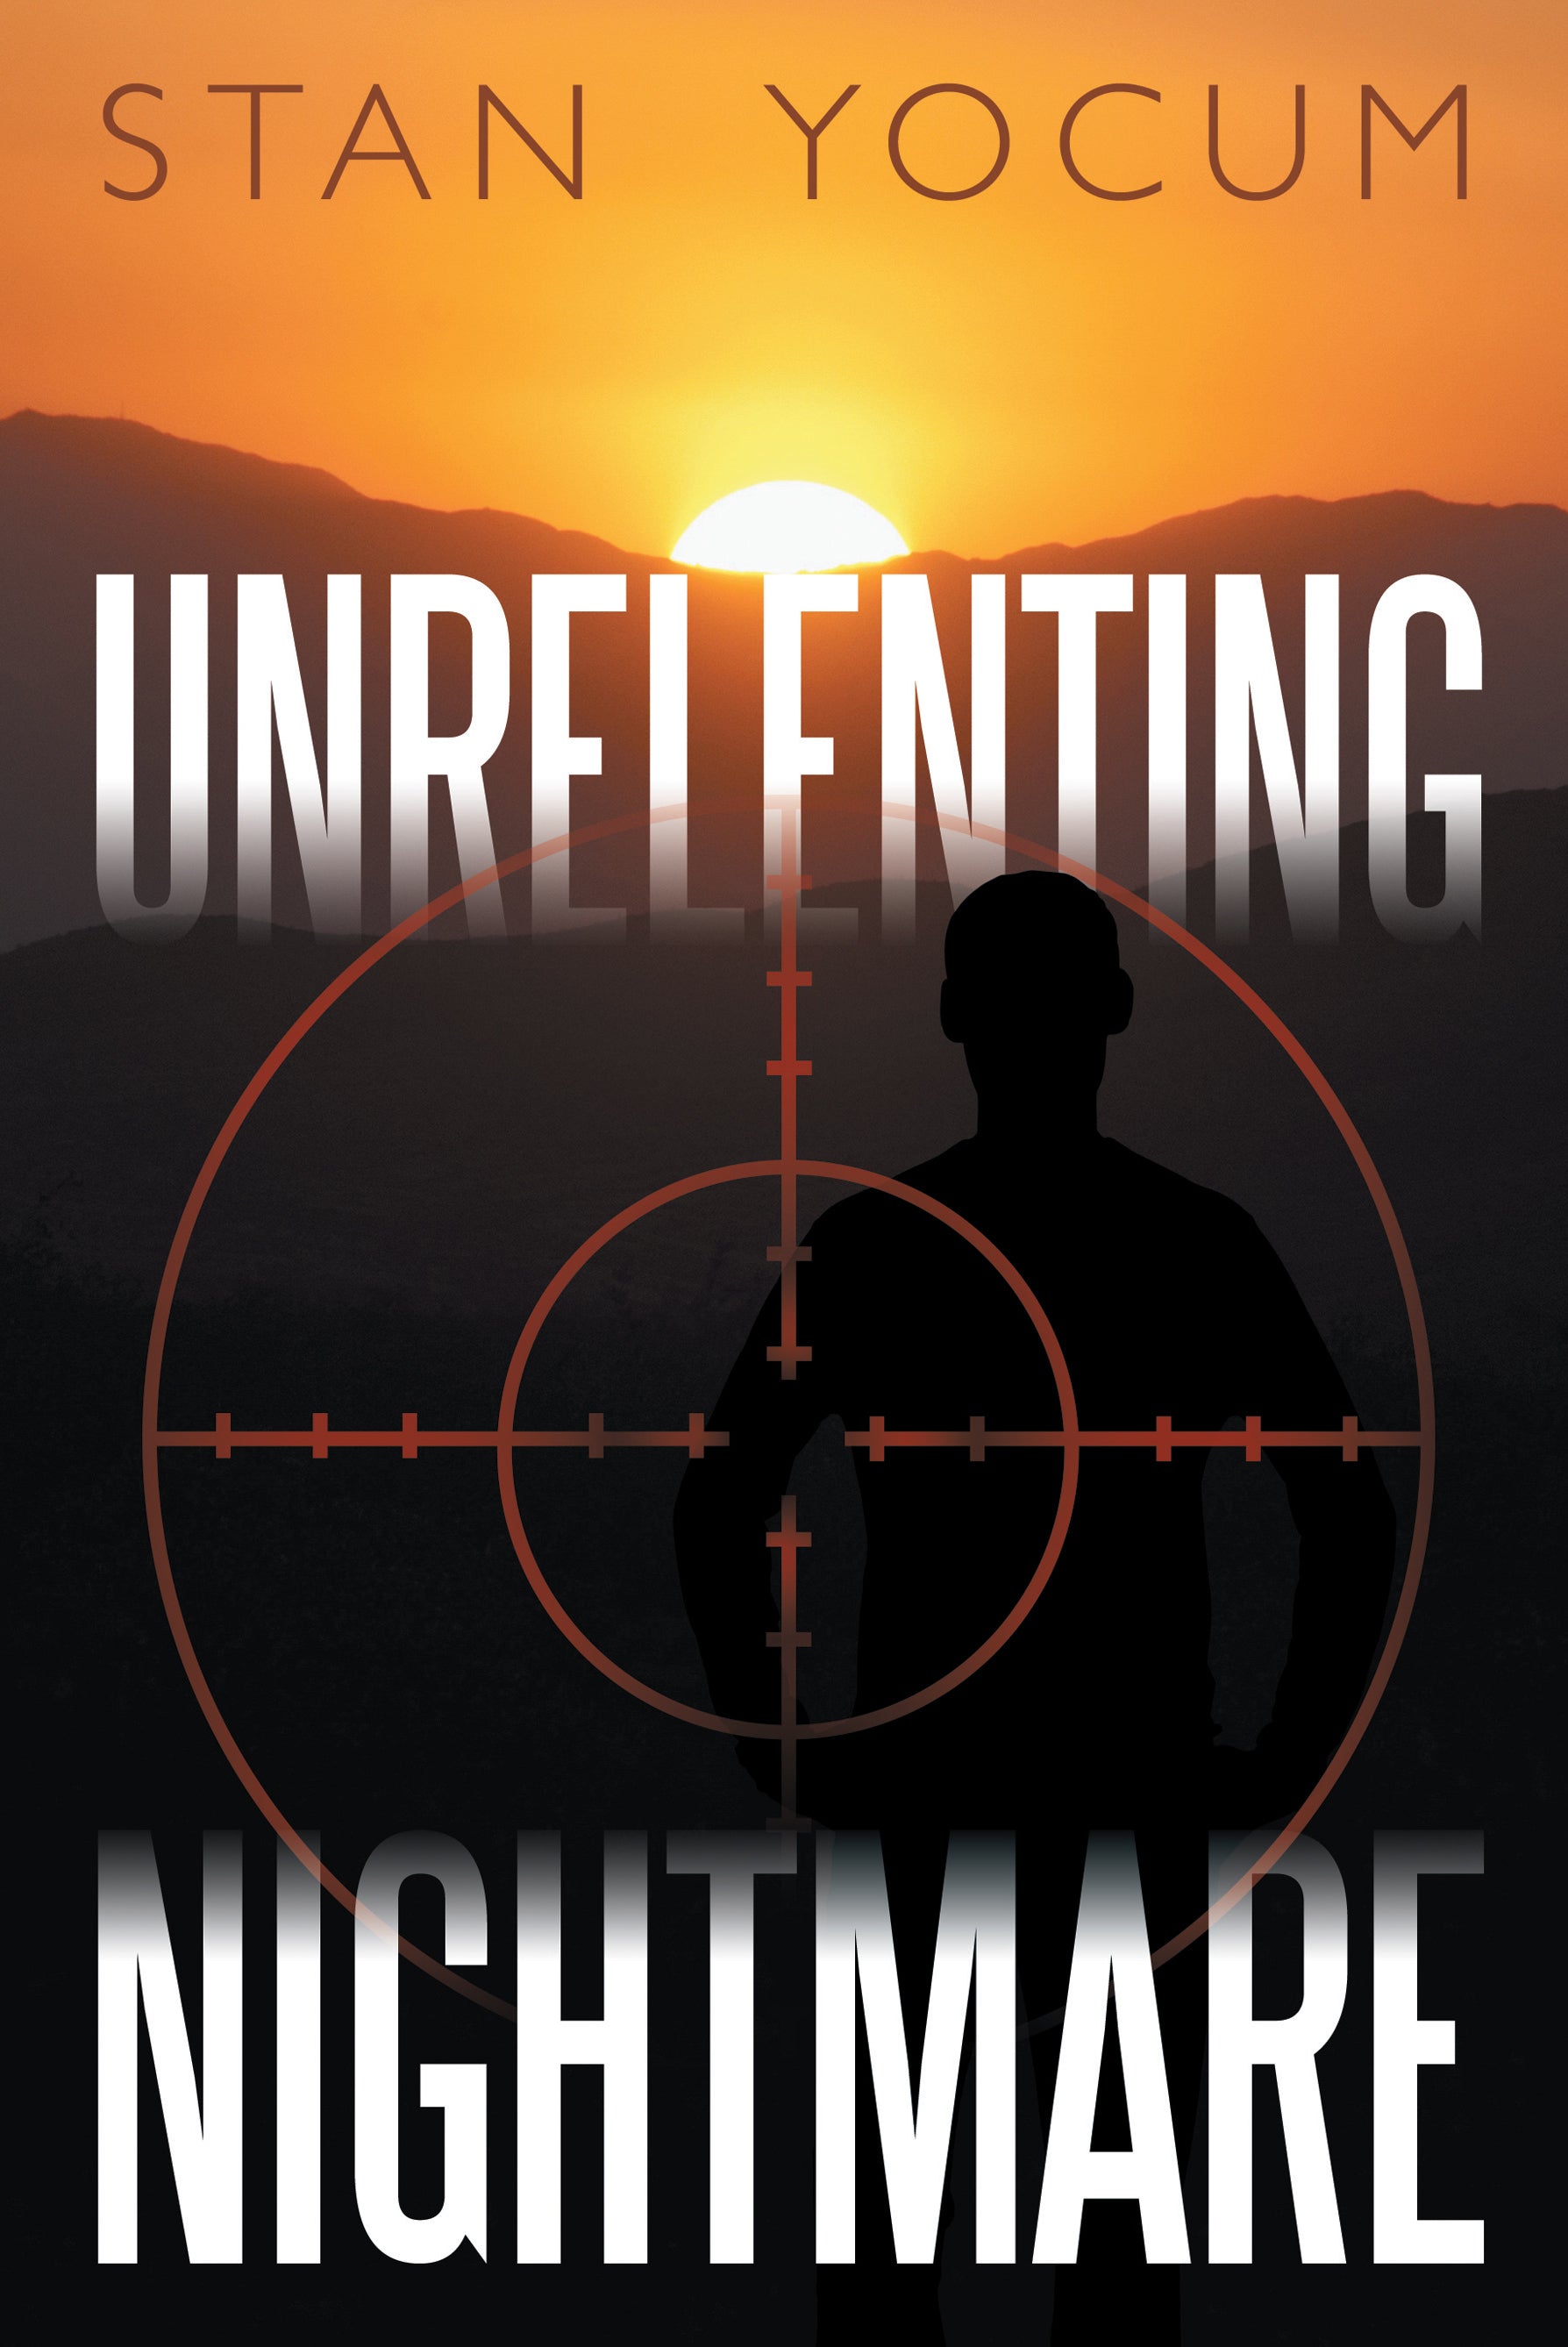 Book Review: Unrelenting Nightmare by Stan Yocum